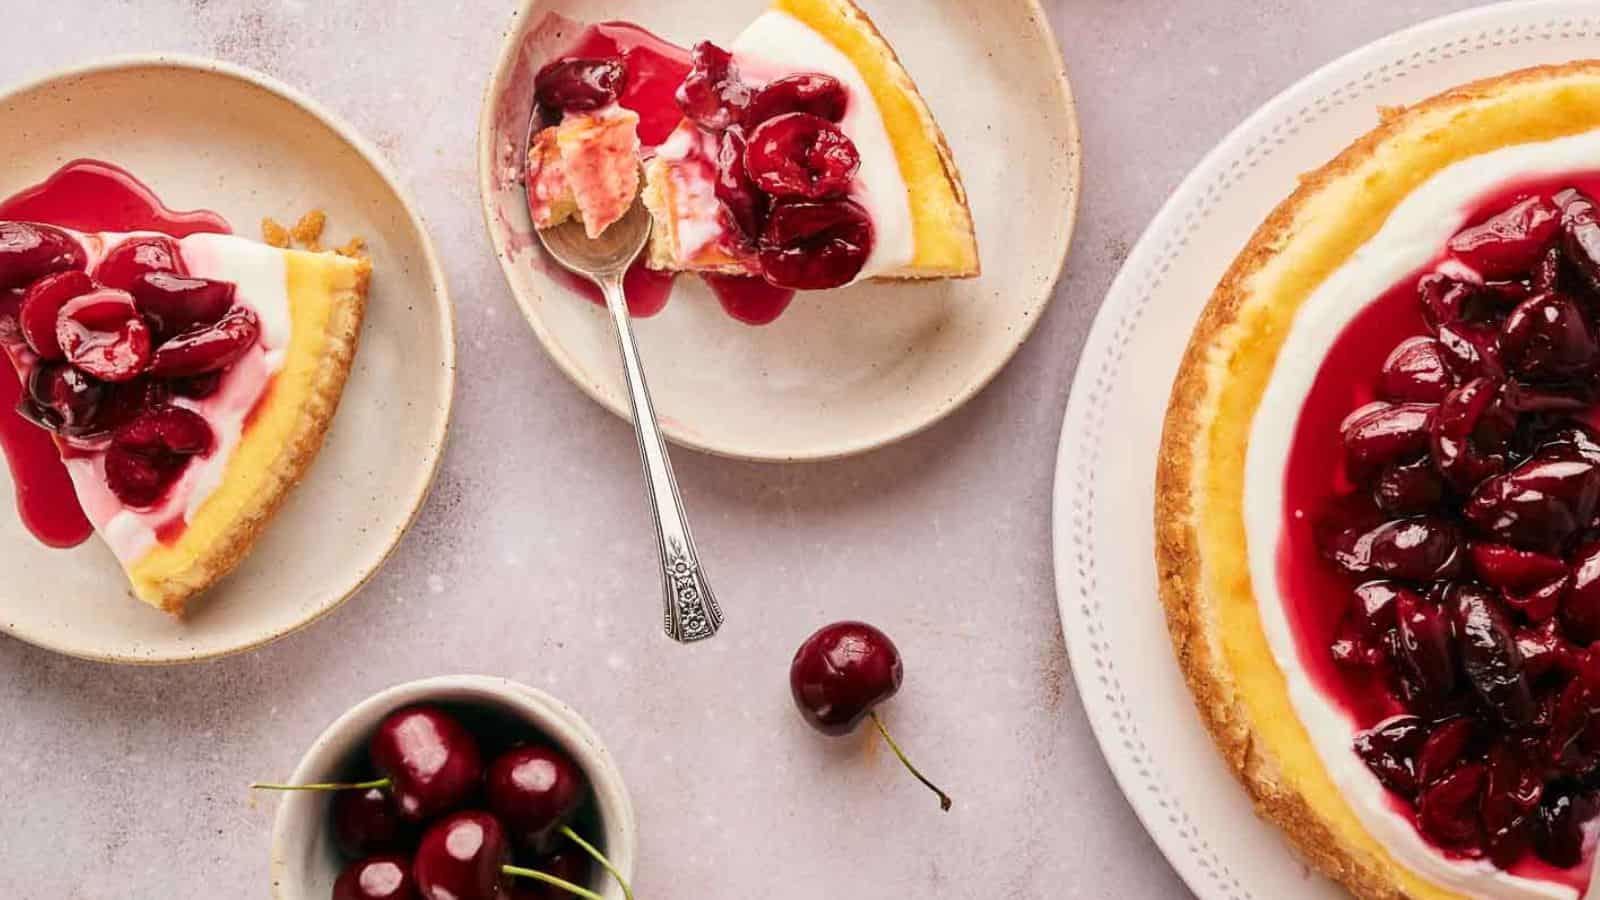 Too Good Not To Share - 17 Desserts Your Family Will Flip Over!